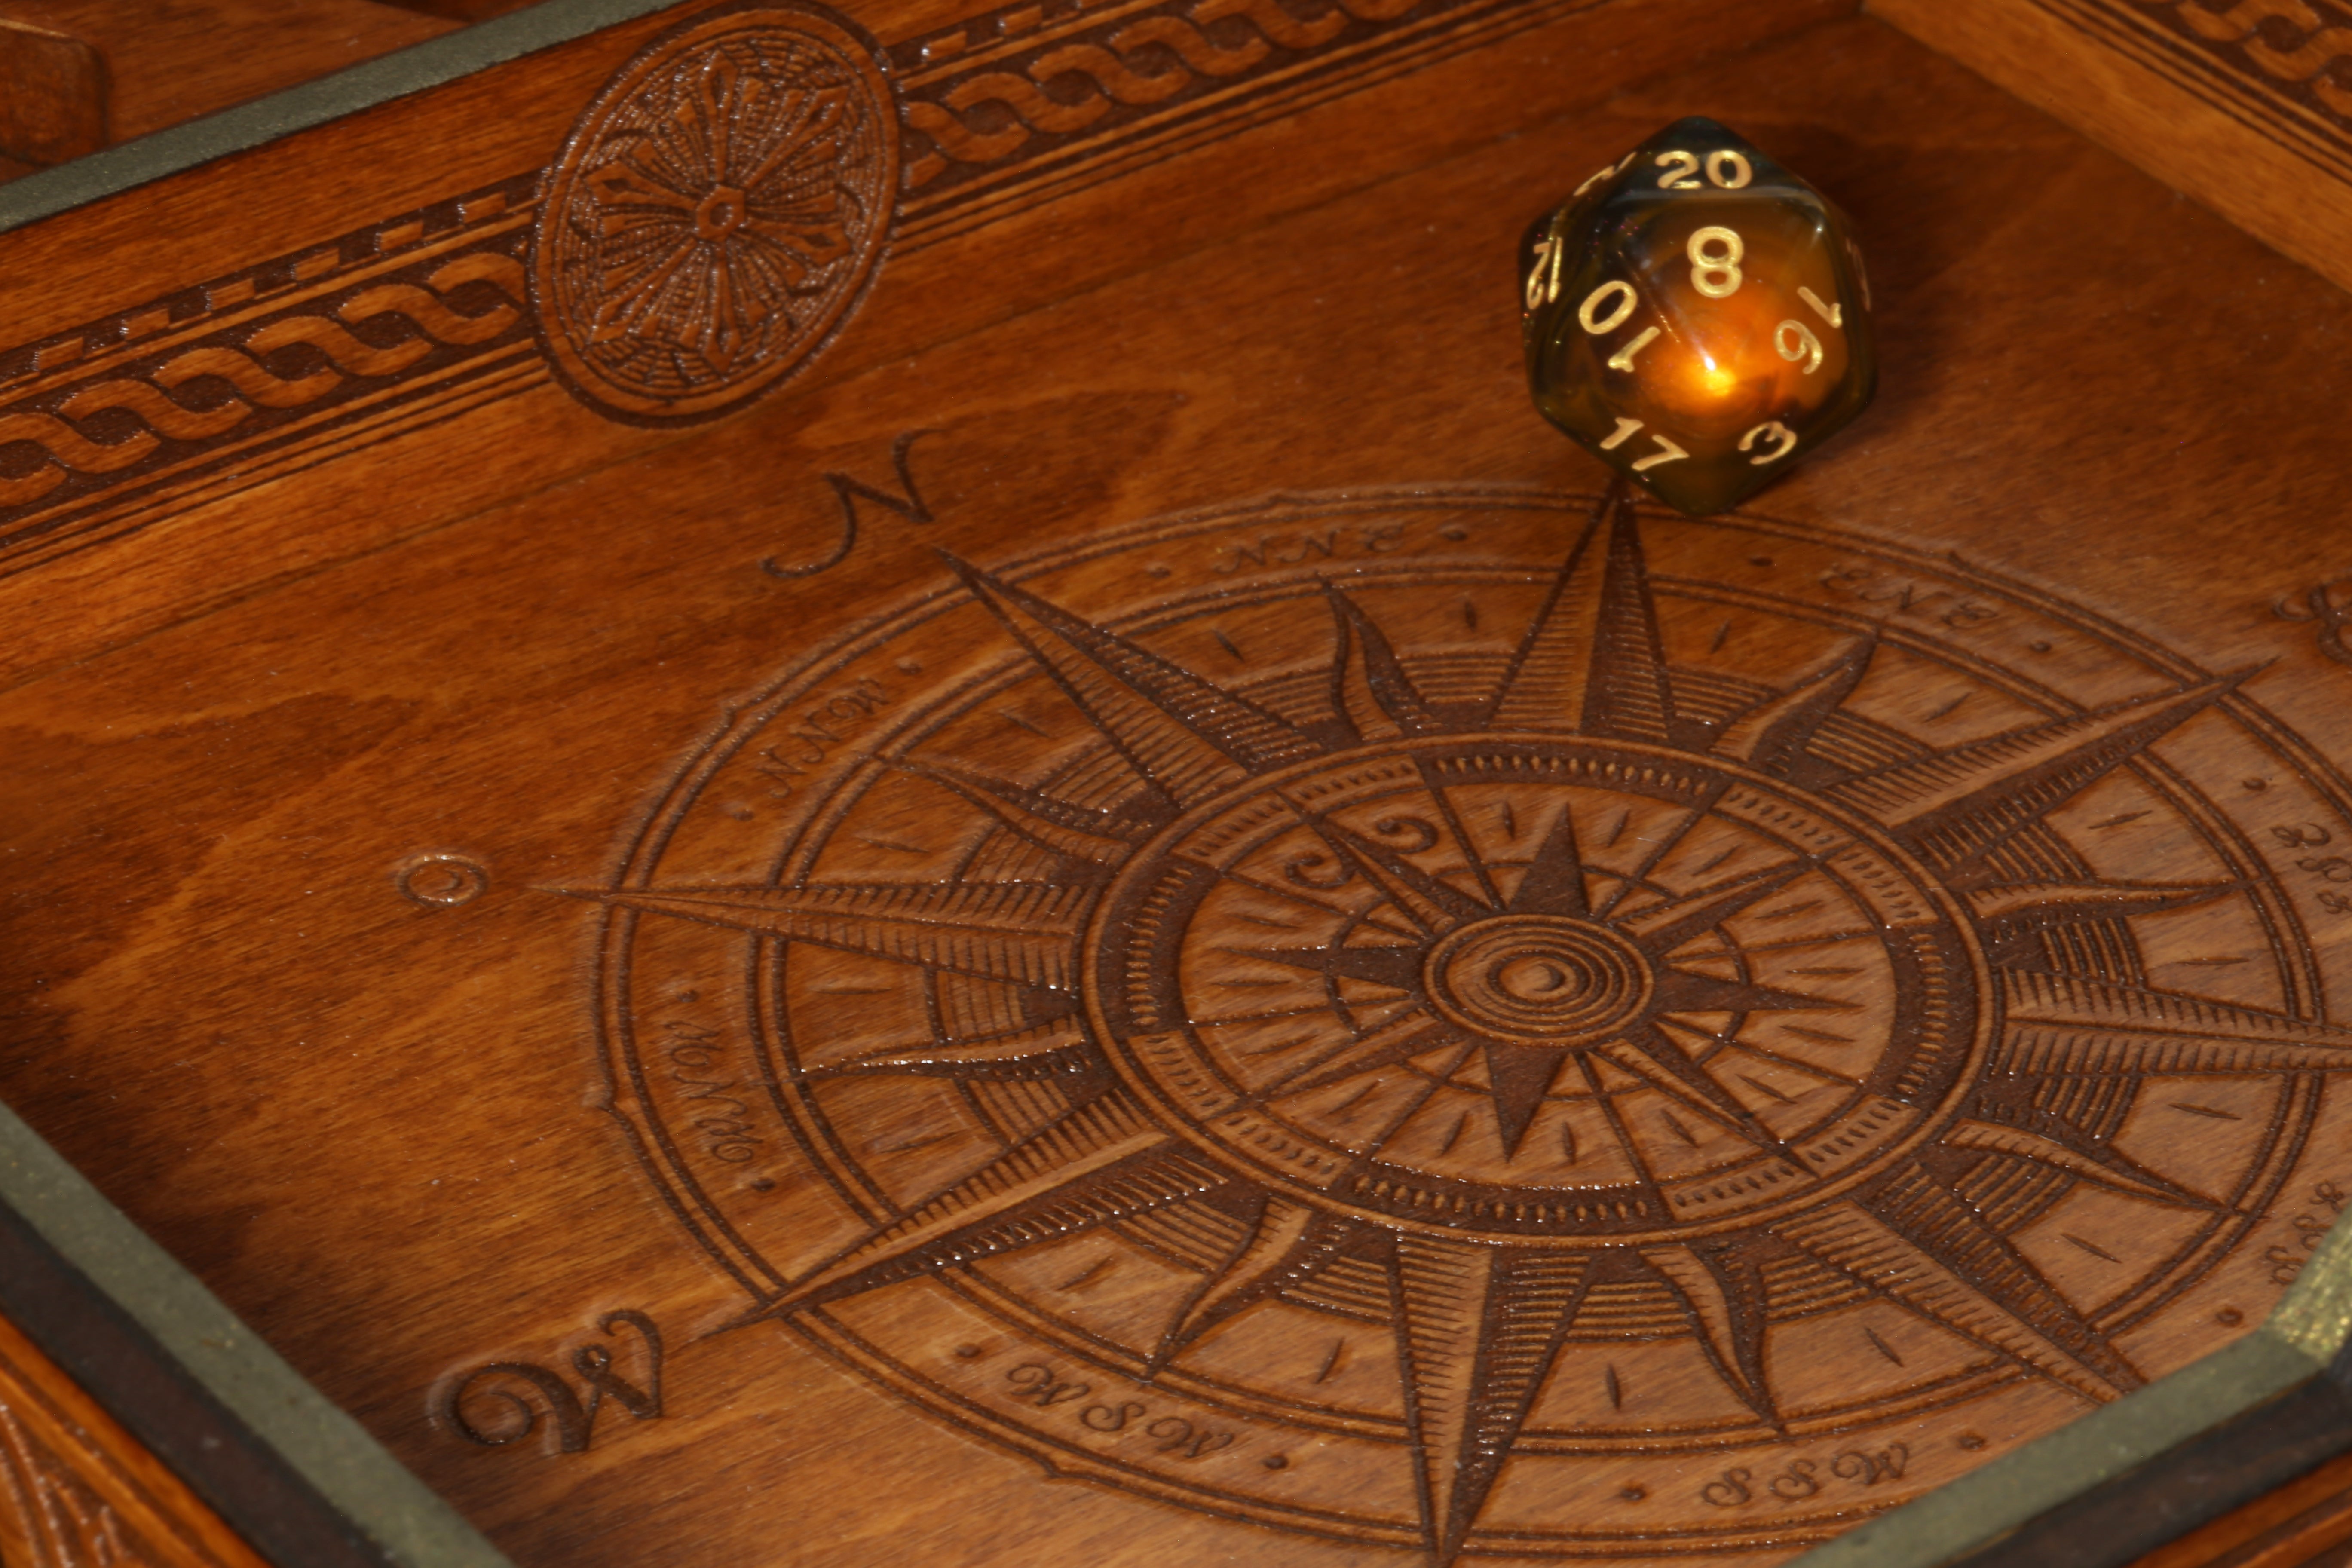 Seafarer's dice tray - The Wizard's Vault